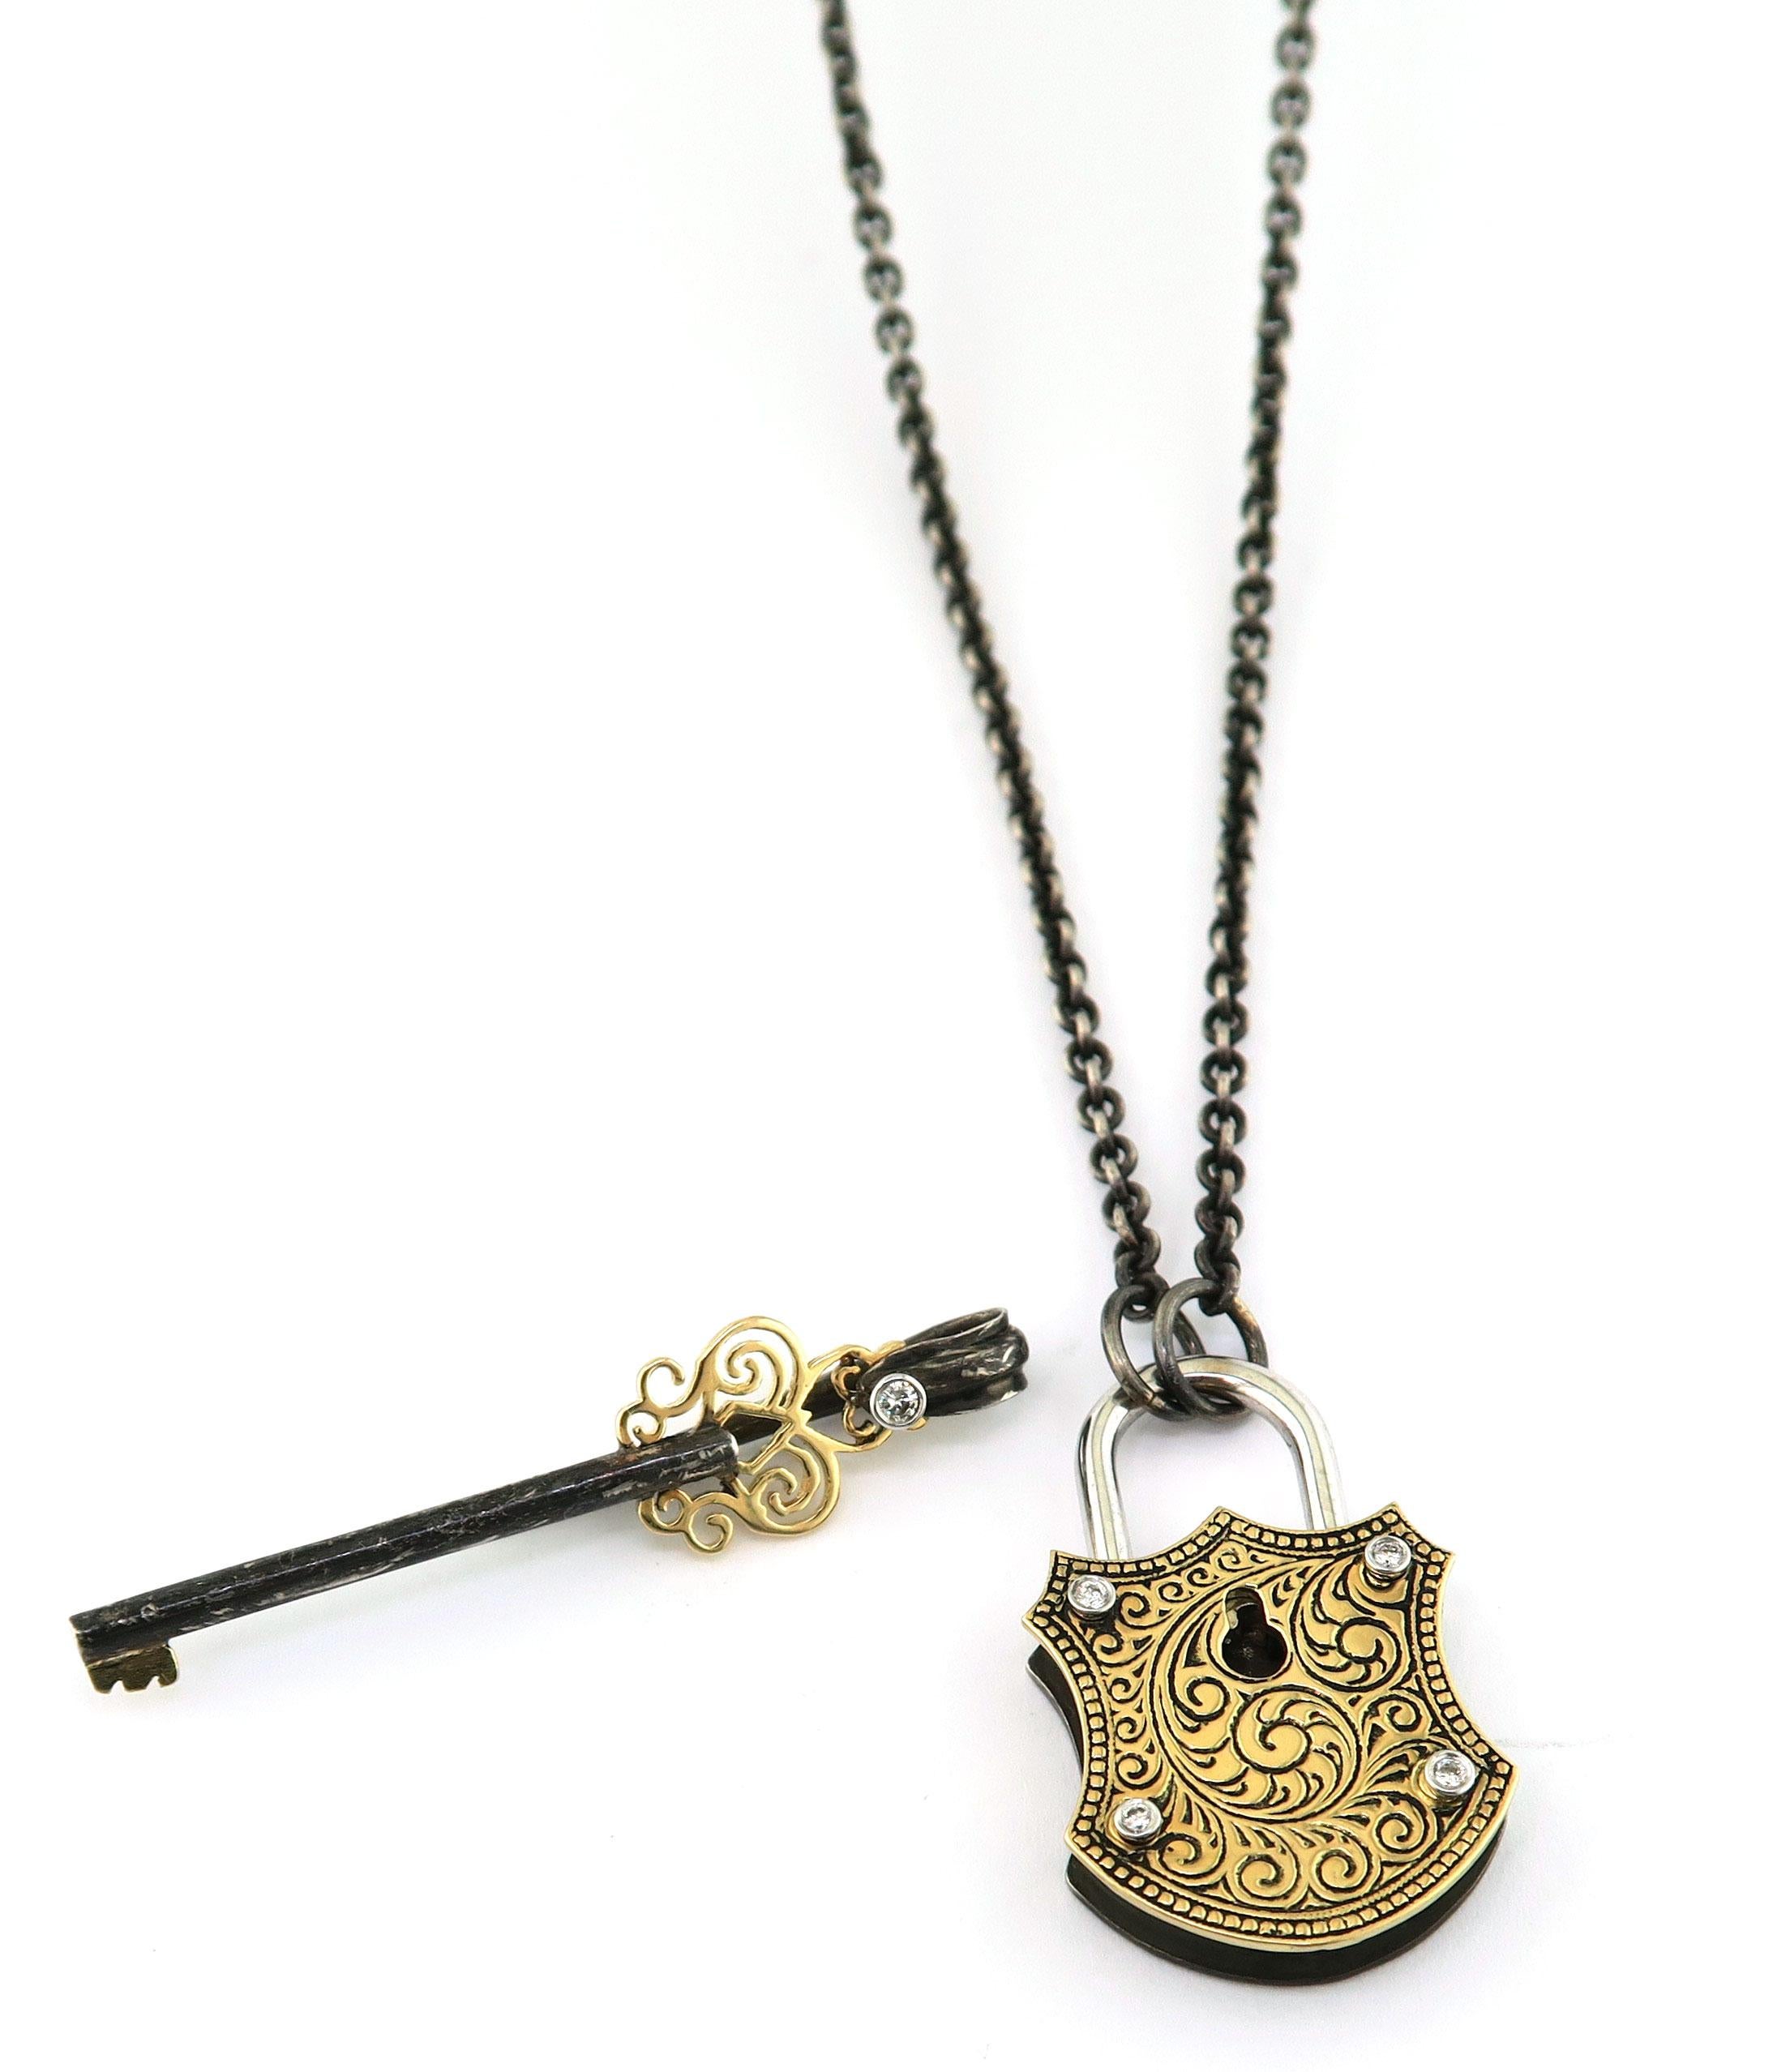 engraved key necklace